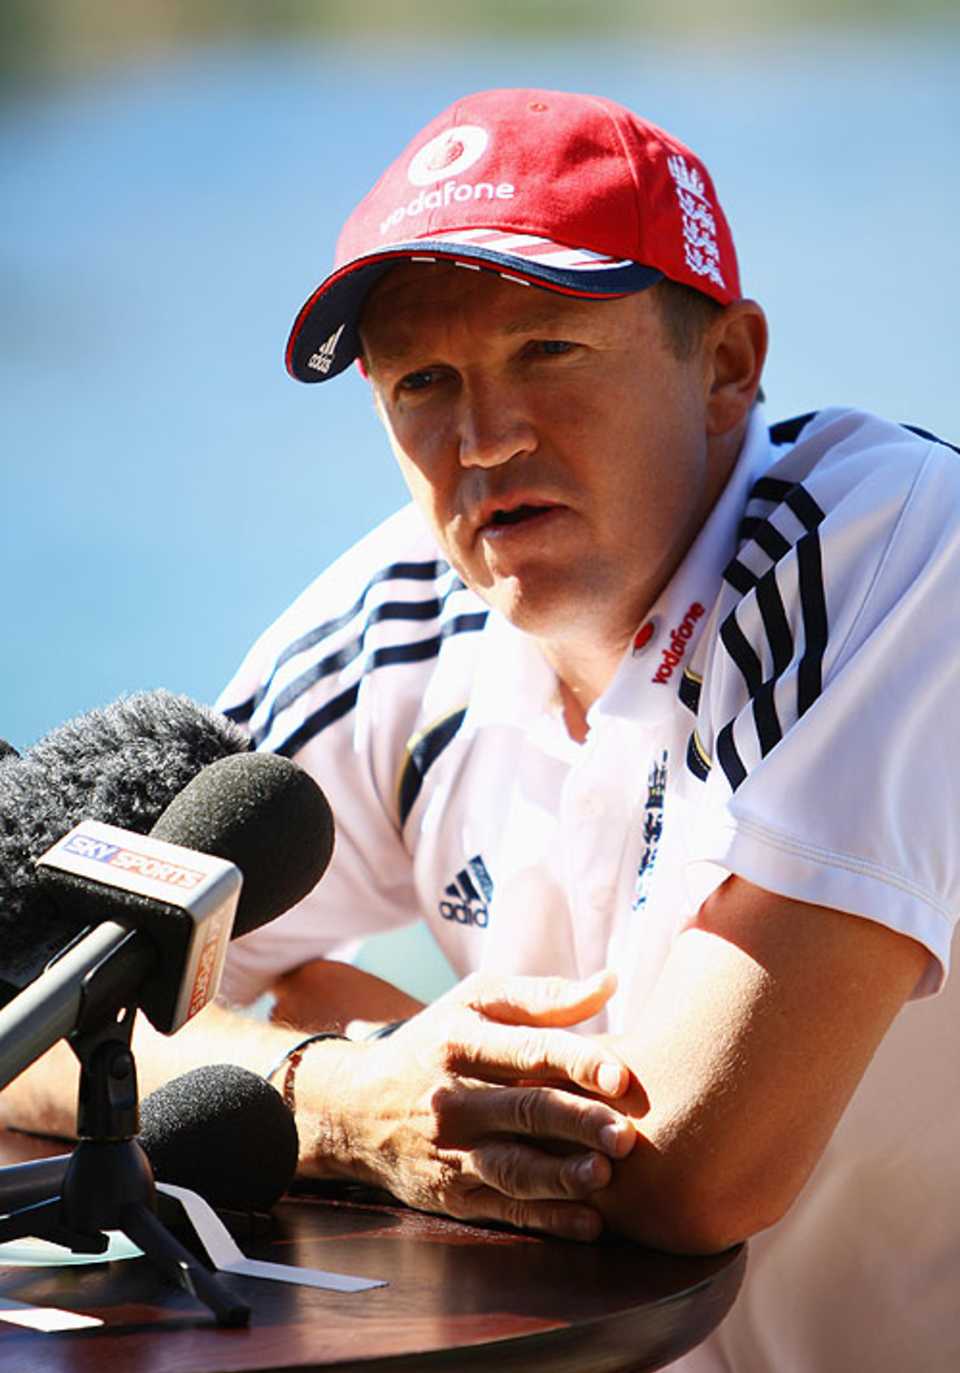 Andy Flower speaks to the media on the morning after England's escape at Newlands, Cape Town, January 8, 2010